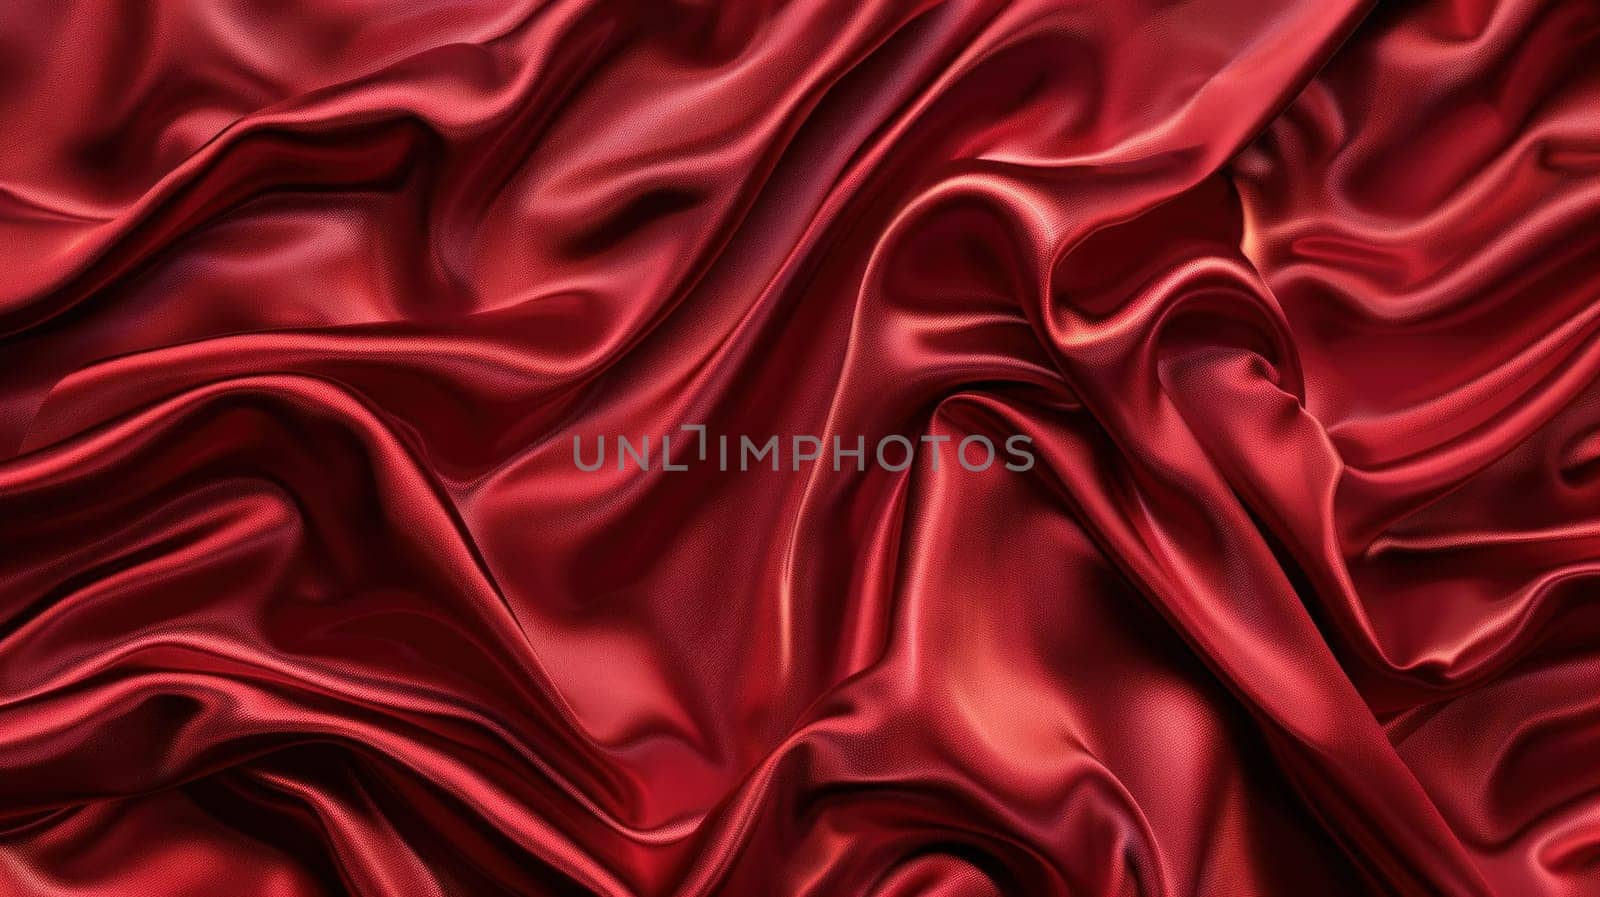 Elegant red satin fabric with beautiful wavy folds for fashion and beauty concept